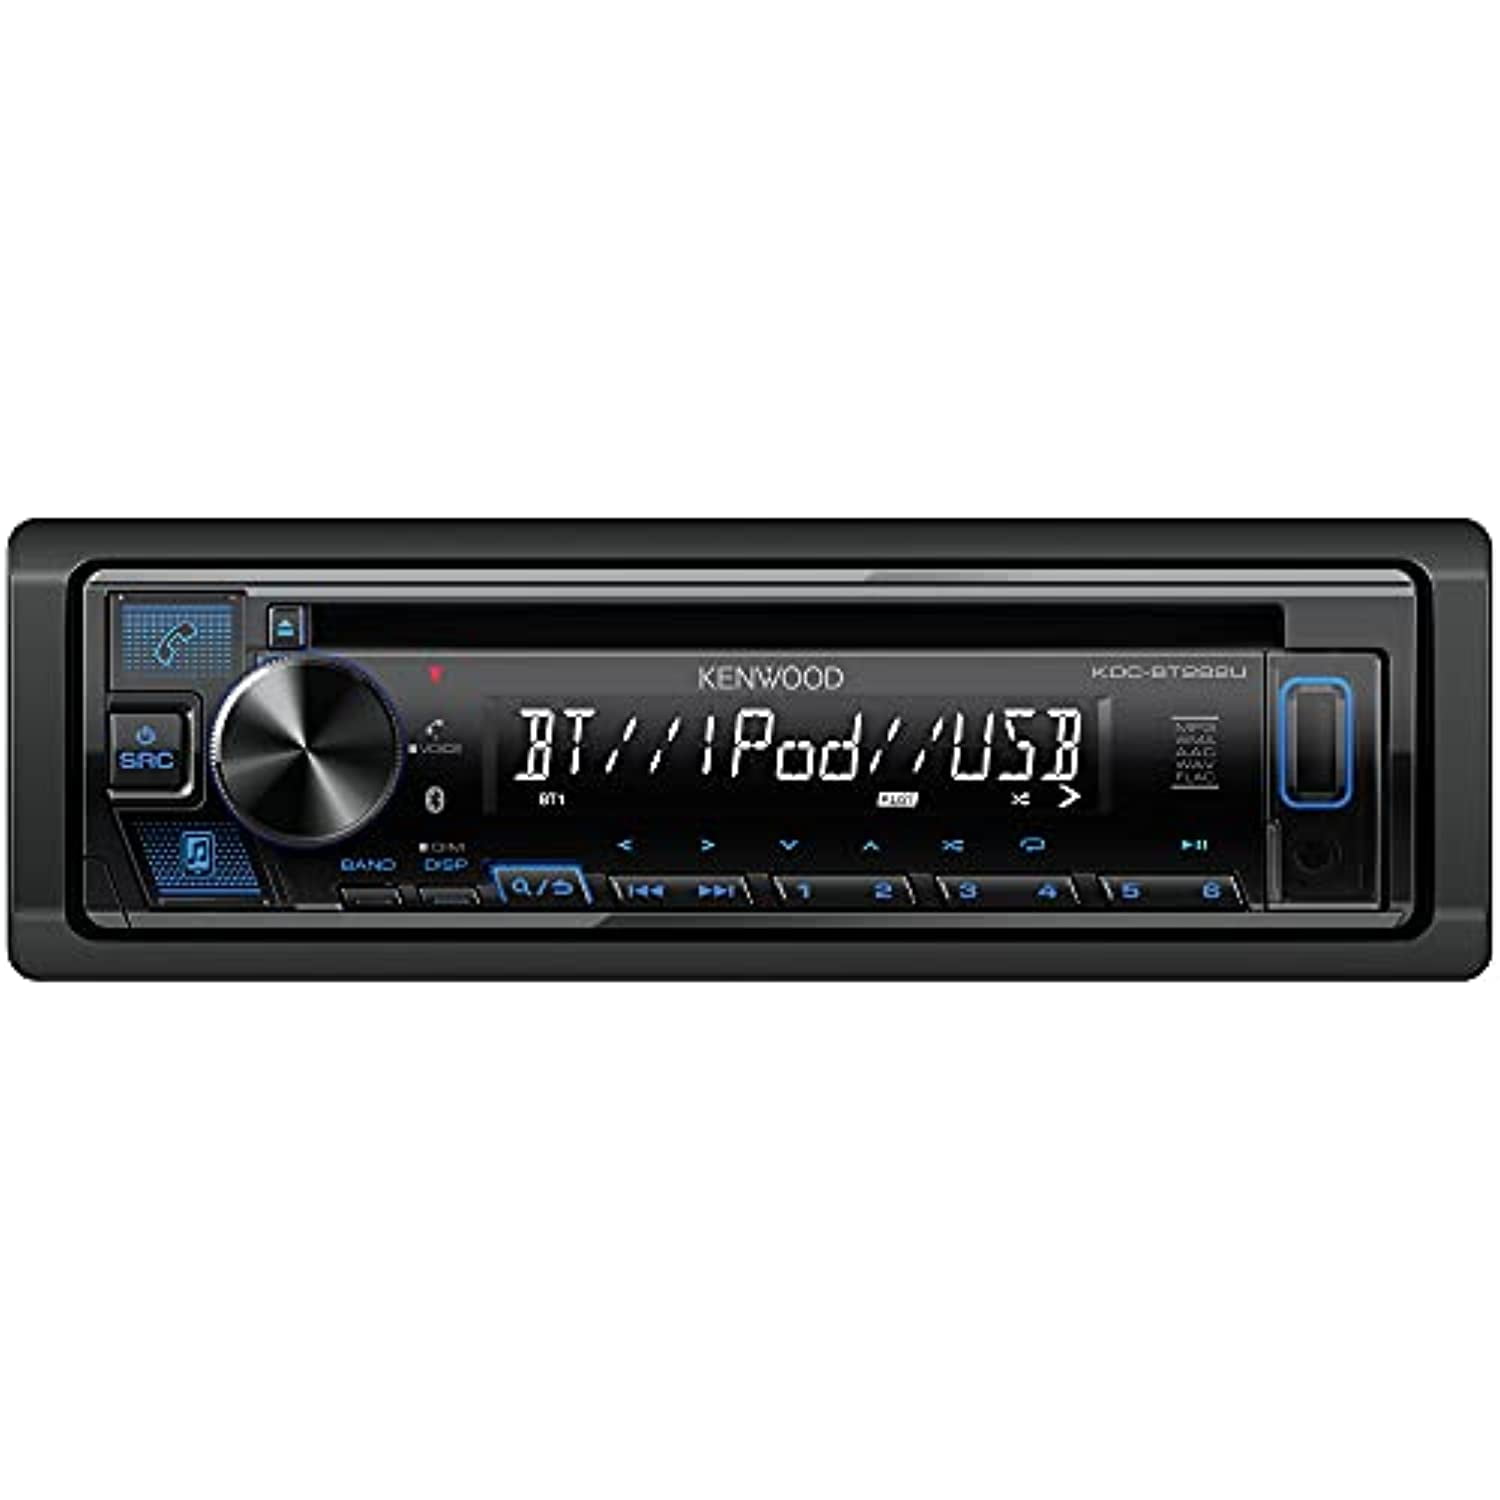 KENWOOD CD Car Stereo - Single Din, Bluetooth Audio, USB MP3, FLAC, Aux in, AM FM Radio, Detachable face with White 13-Digit LCD Display and Blue Button Illumination - Walmart.com